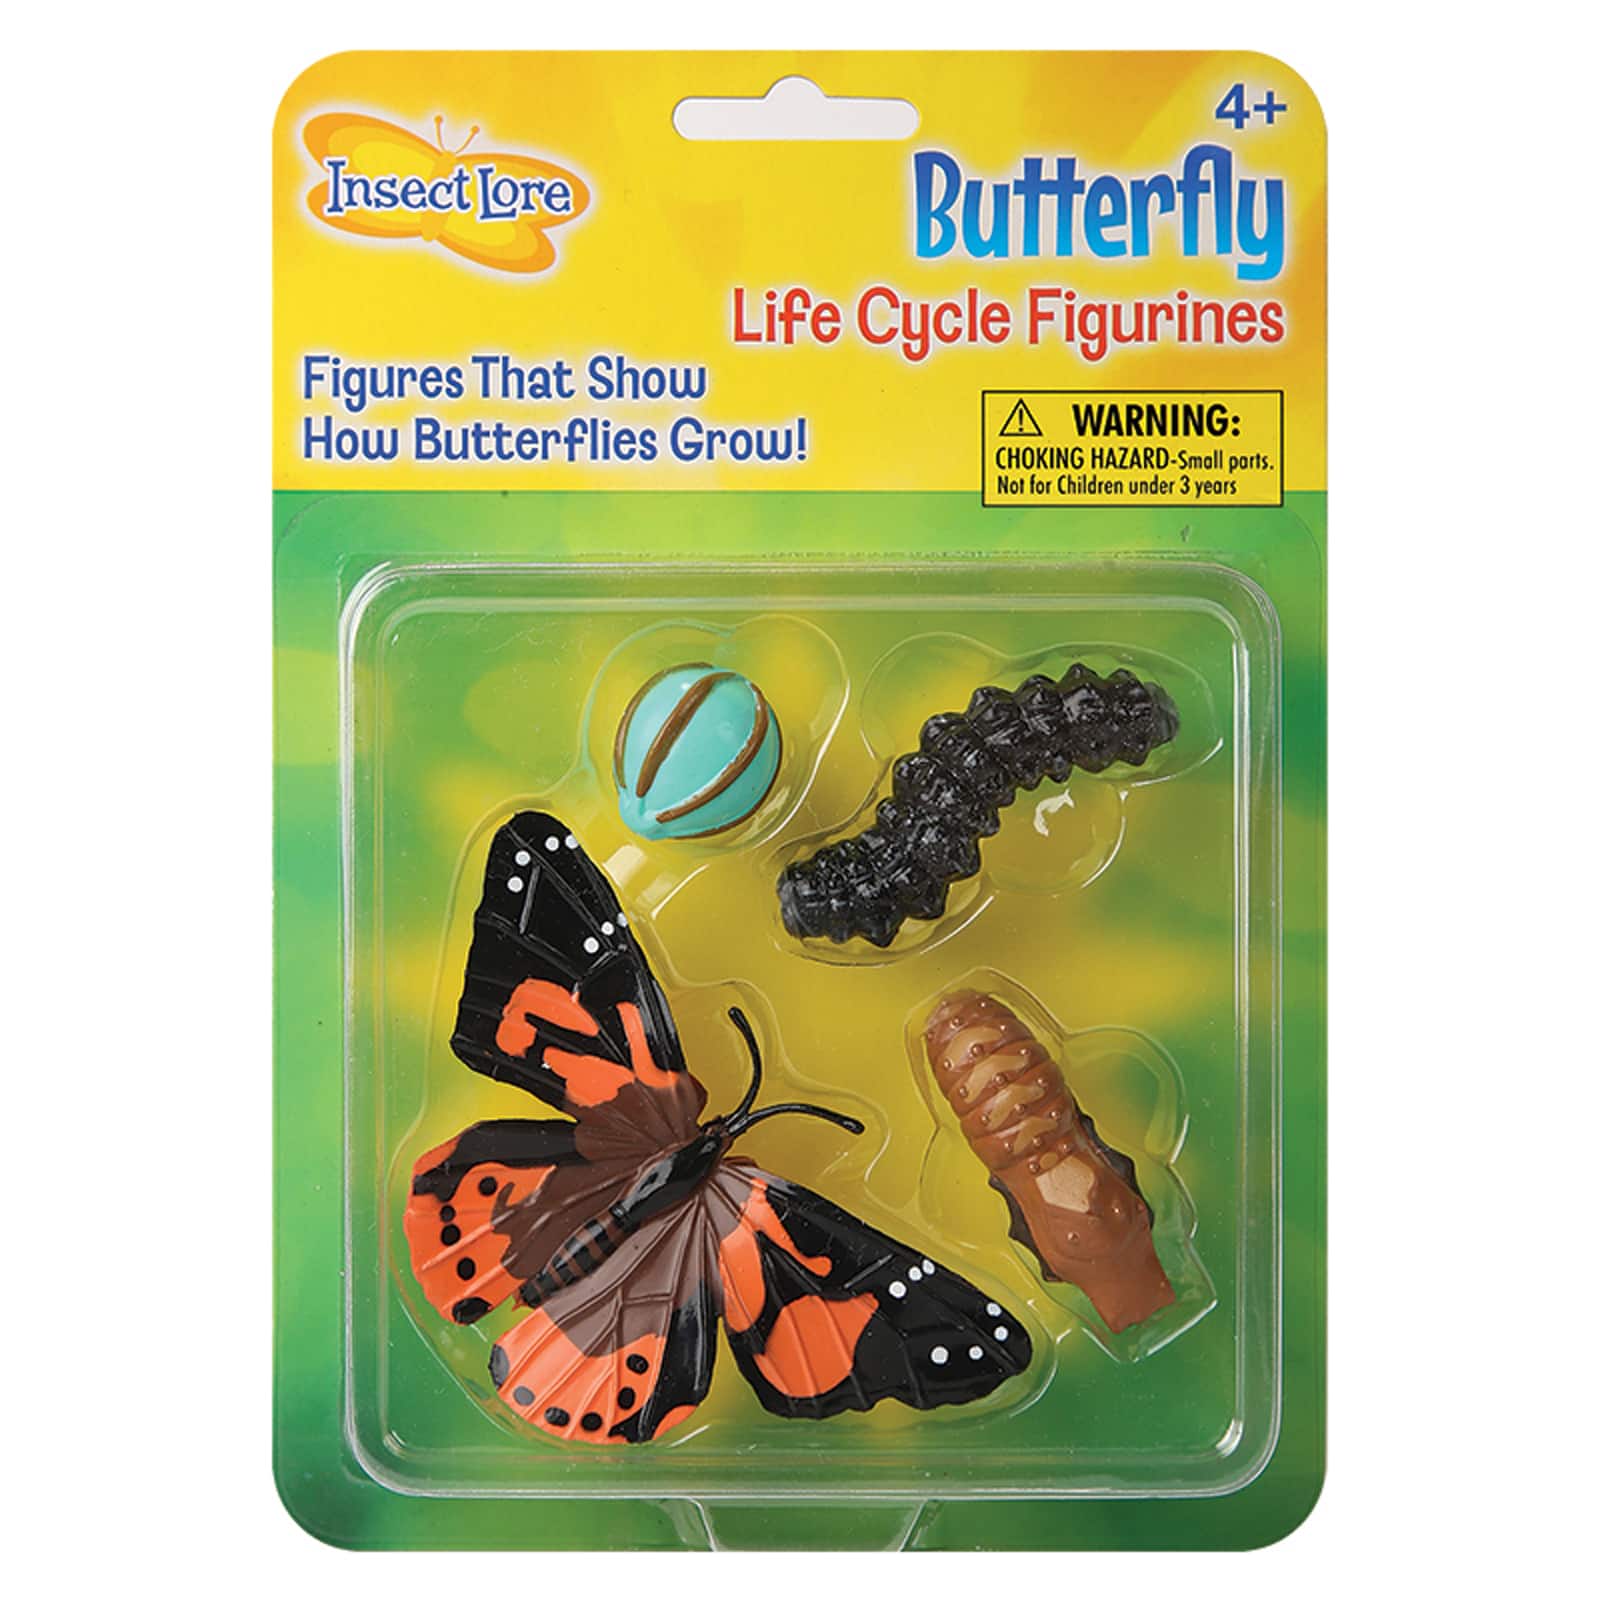 Plastic Insect Growth Stage Lifelike Butterfly Life Cycle Model Play Set for 